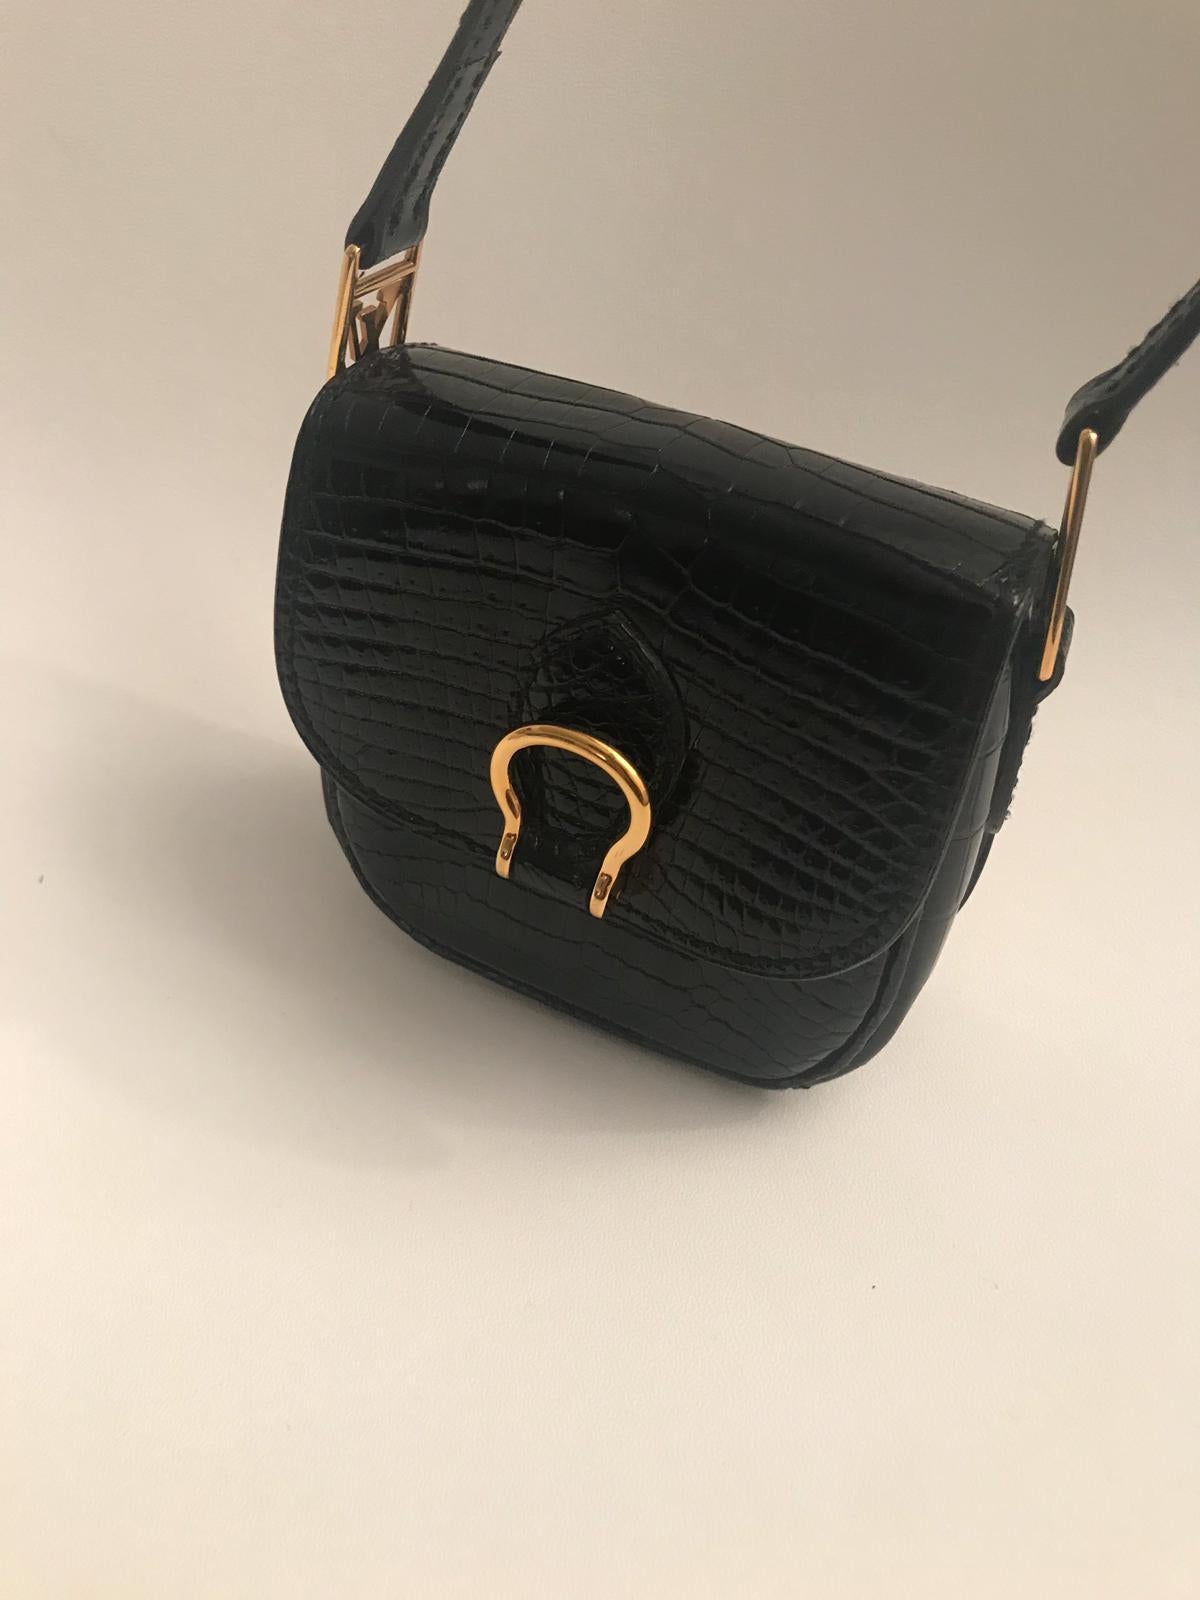 Vintage but in really good condition mini St Cloud in Black Crocodile.
Can be worn crossbody
Signed inside
Size 12*12*5 cm